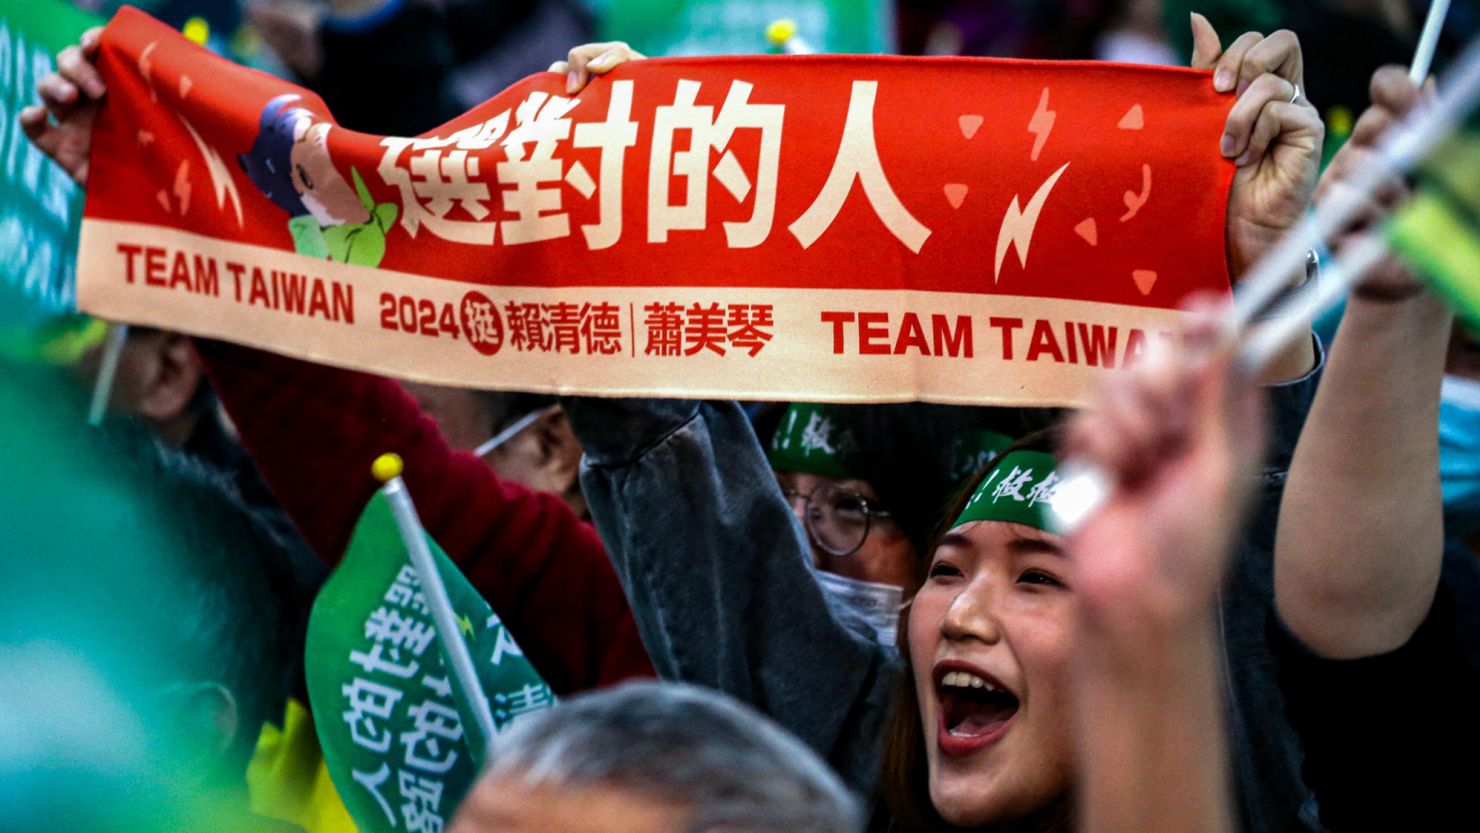 Supporters of Lai Ching-te, presidential candidate of Democratic Progressive Party (DPP), cheer during an election campaign rally, in Keelung on January 8, 2024, ahead of the upcoming presidential elections. (Photo by I-Hwa CHENG / AFP) (Photo by I-HWA CHENG/AFP via Getty Images)